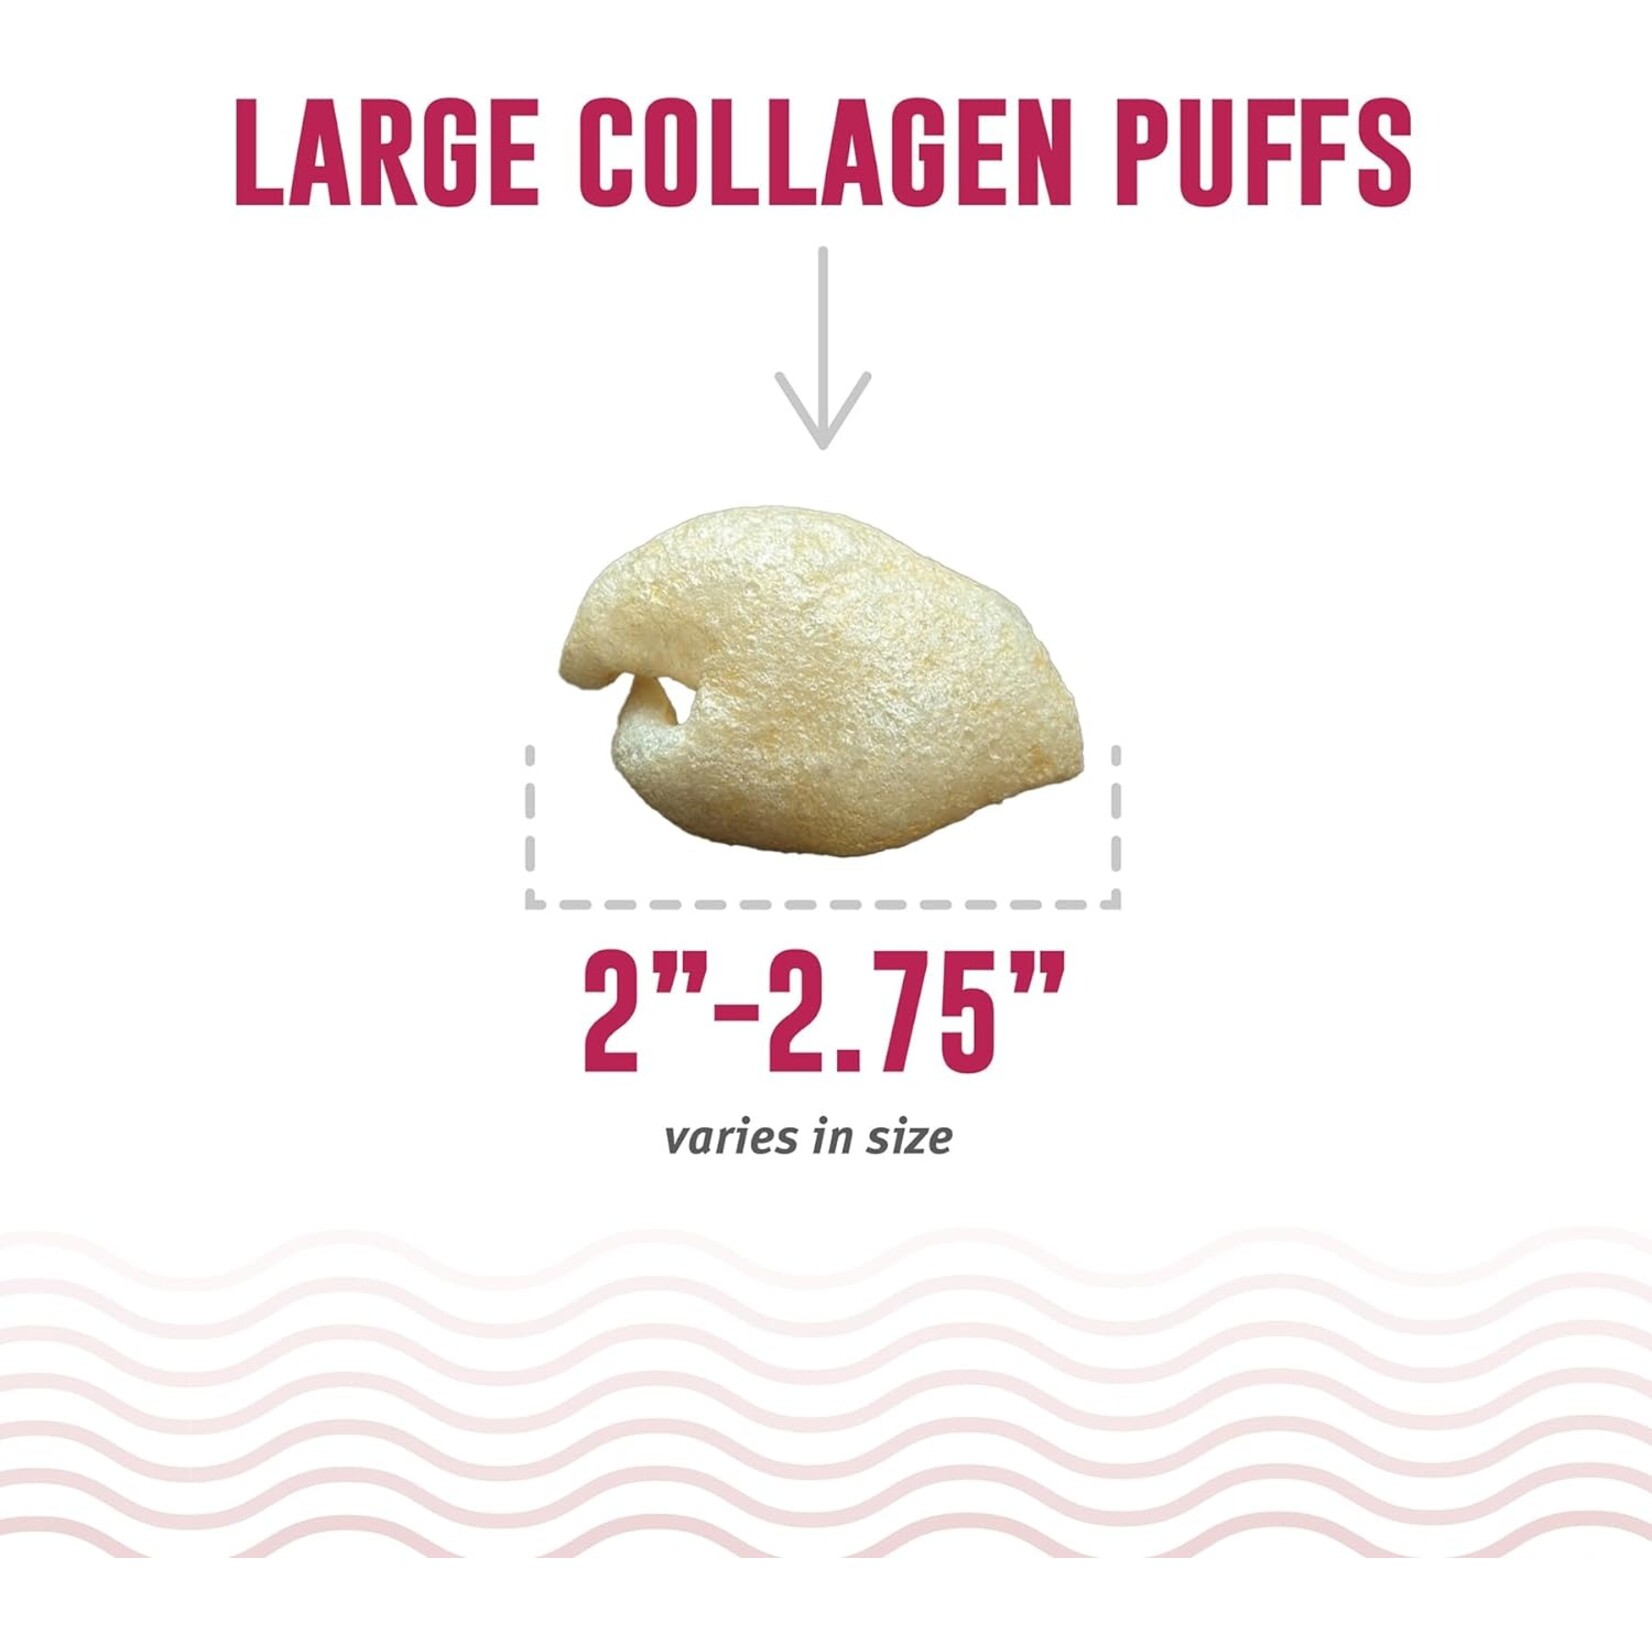 Icelandic+ Icelandic+ Beef Collagen Puffs with Marrow Treats for Dogs 2.5oz